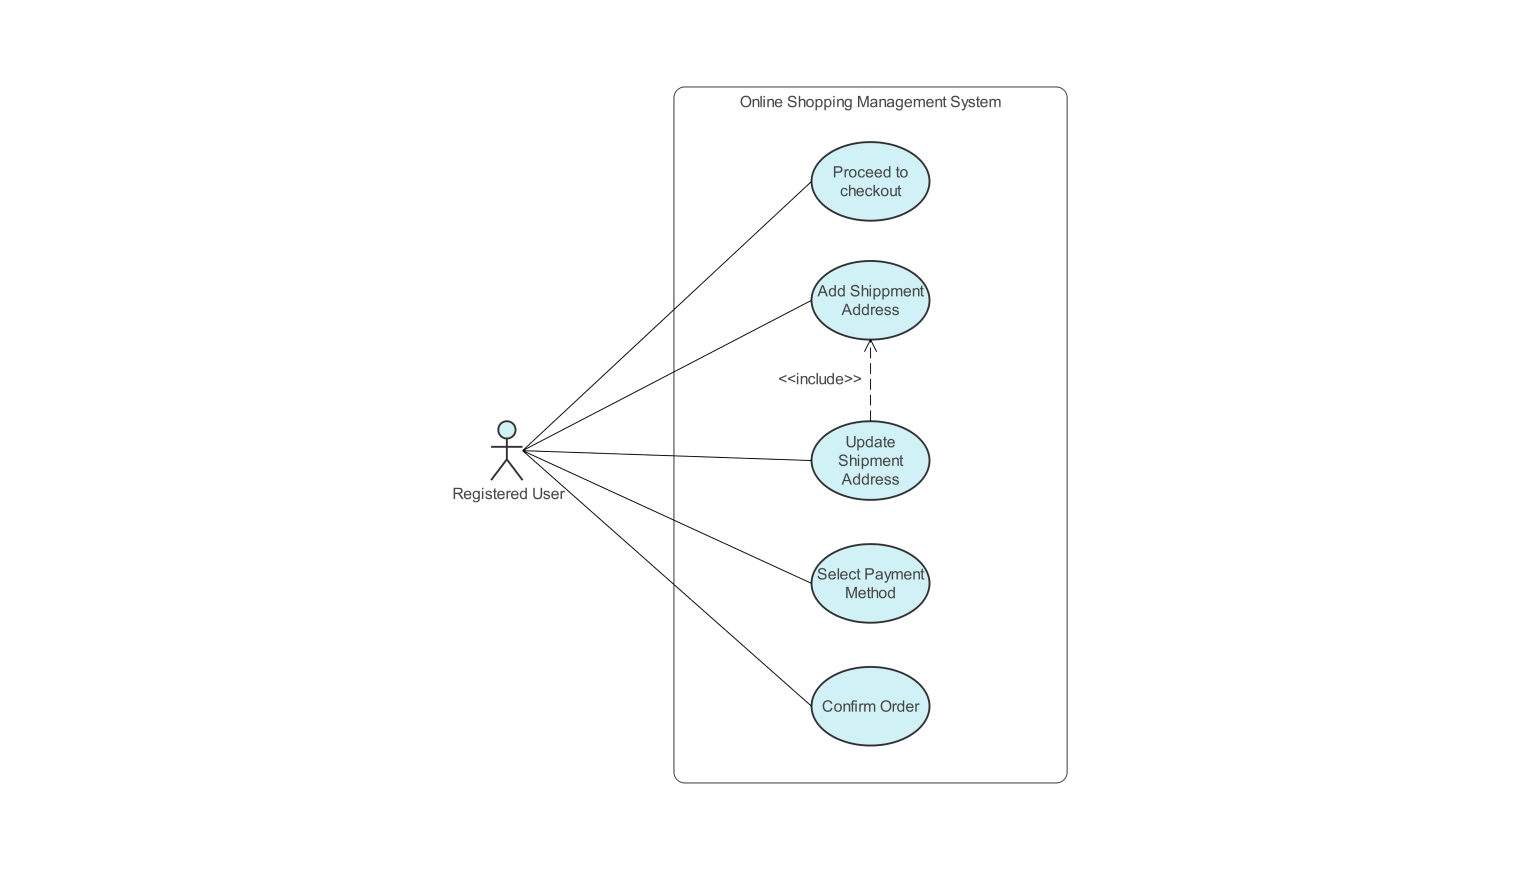 Use Case diagram for order placement